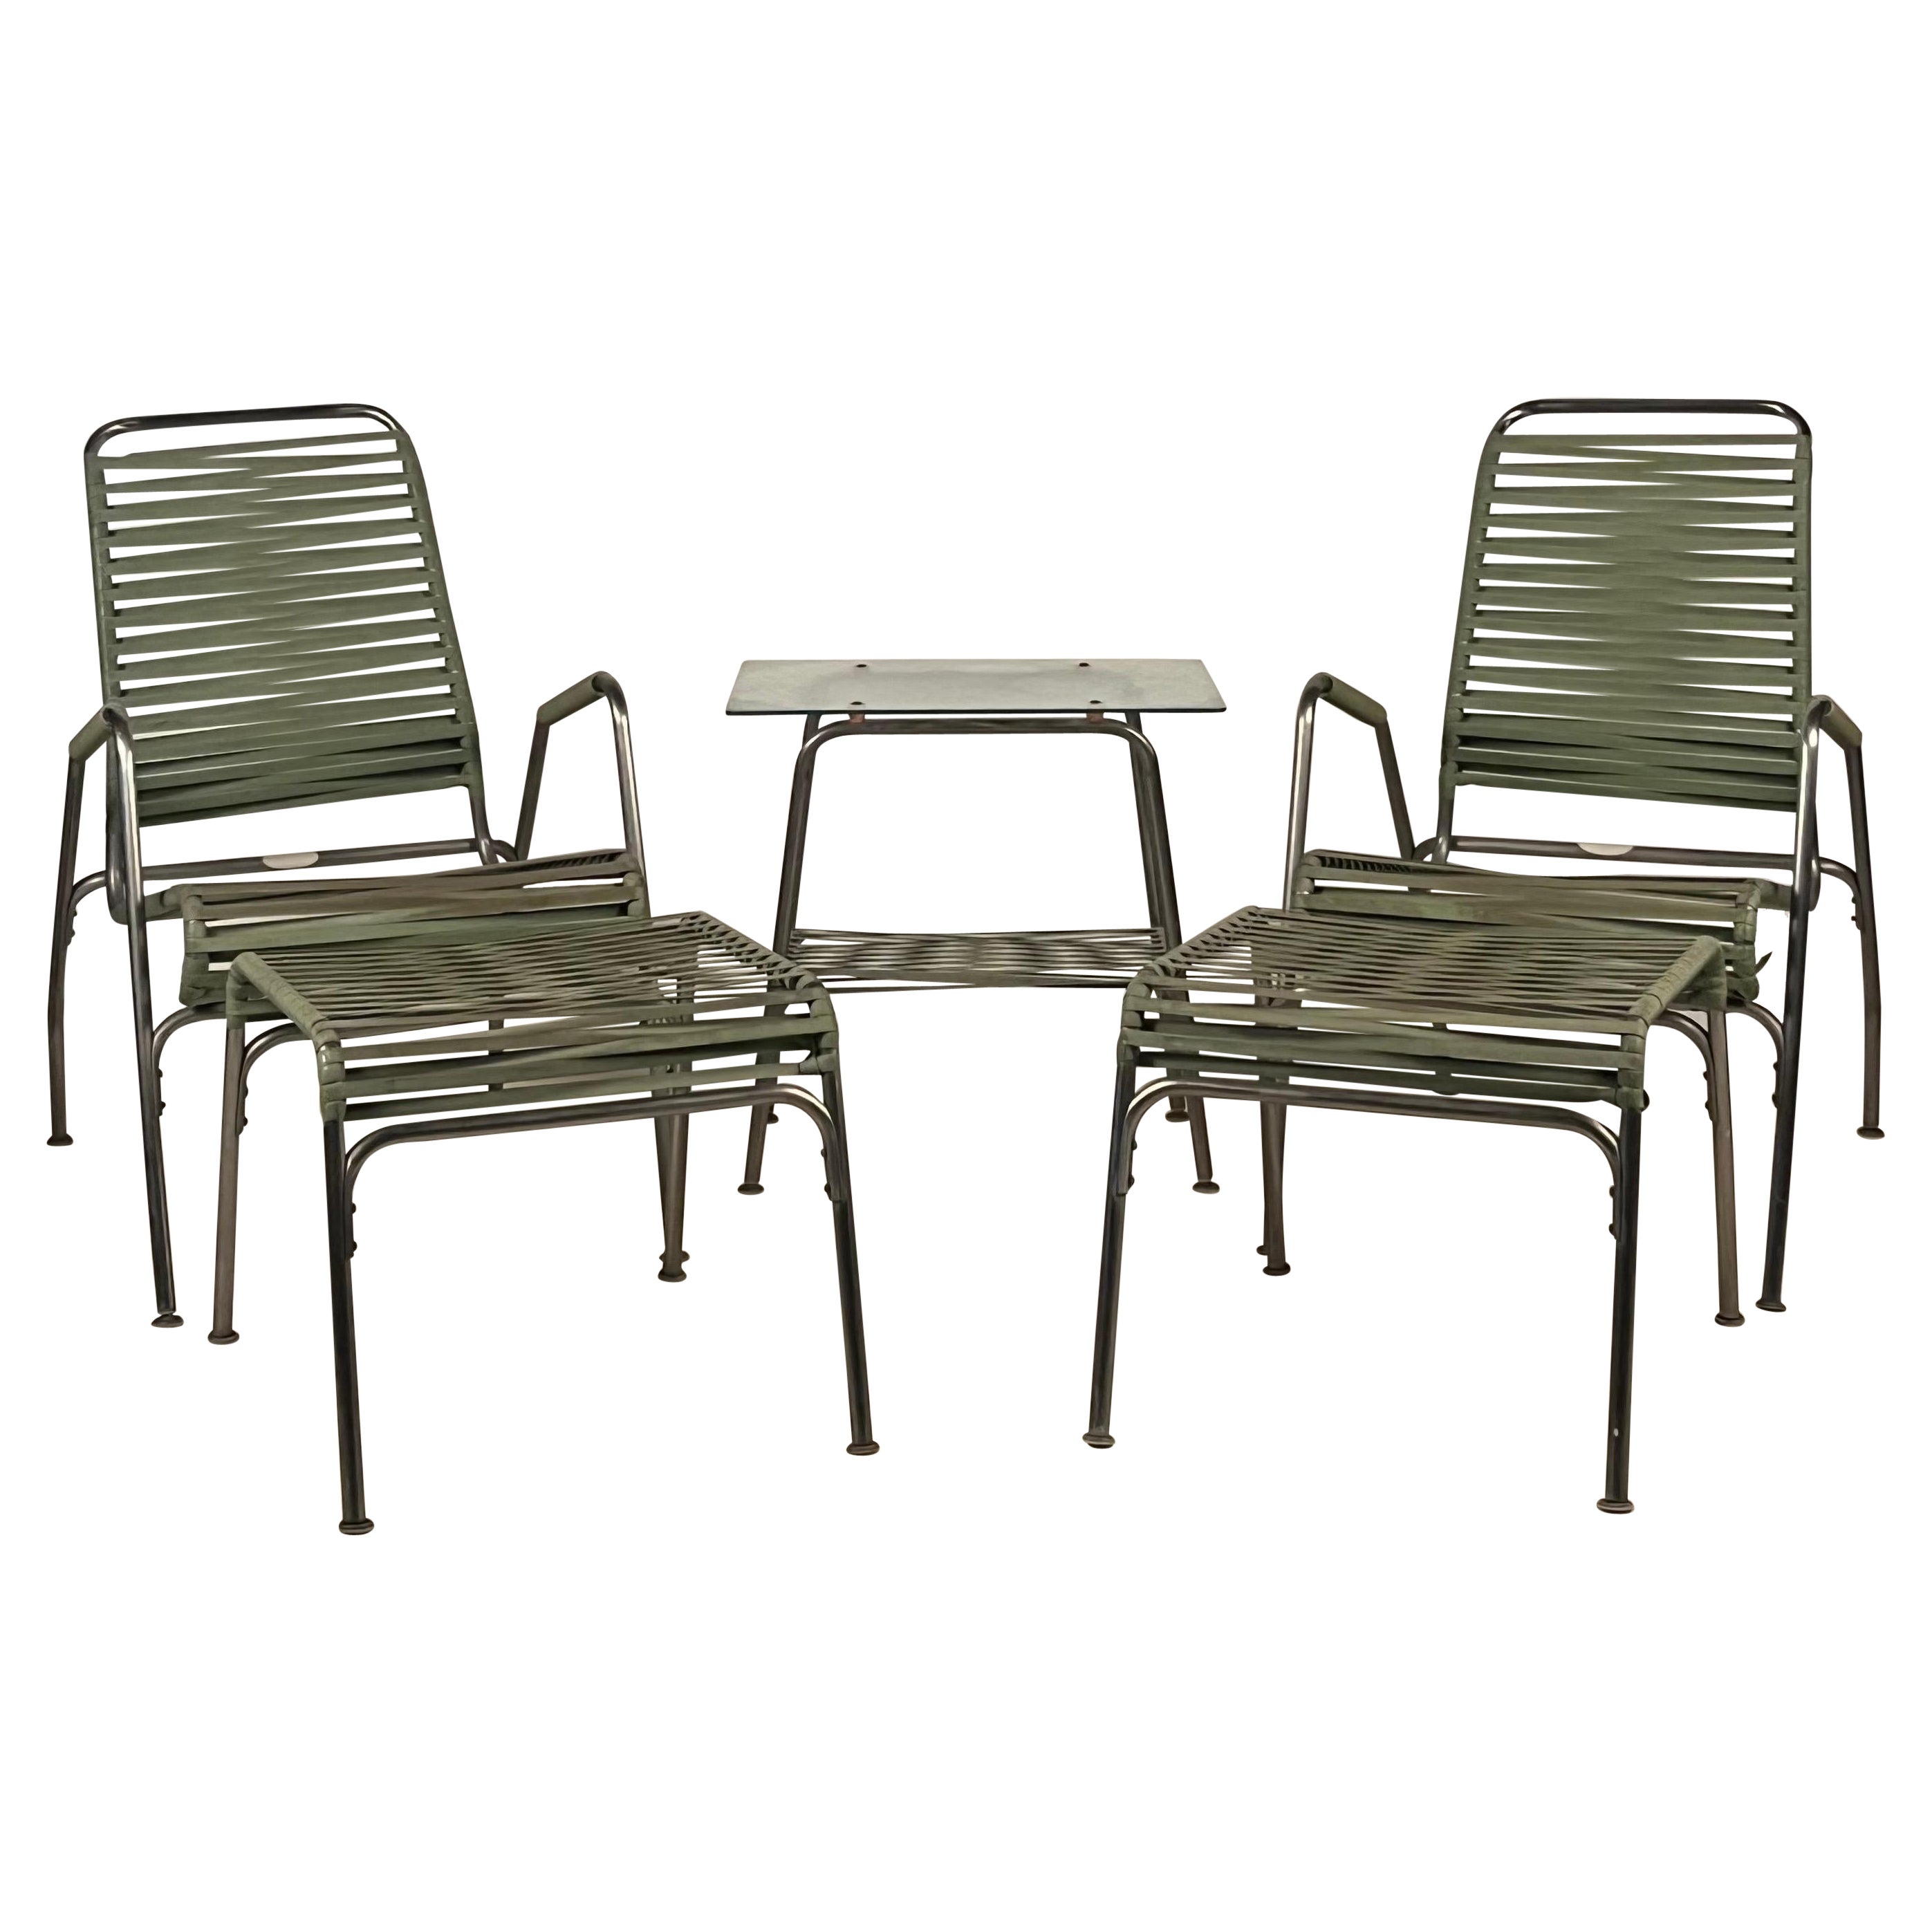 Rare Set of American Mid-Century Stainless Steel Patio Furniture For Sale